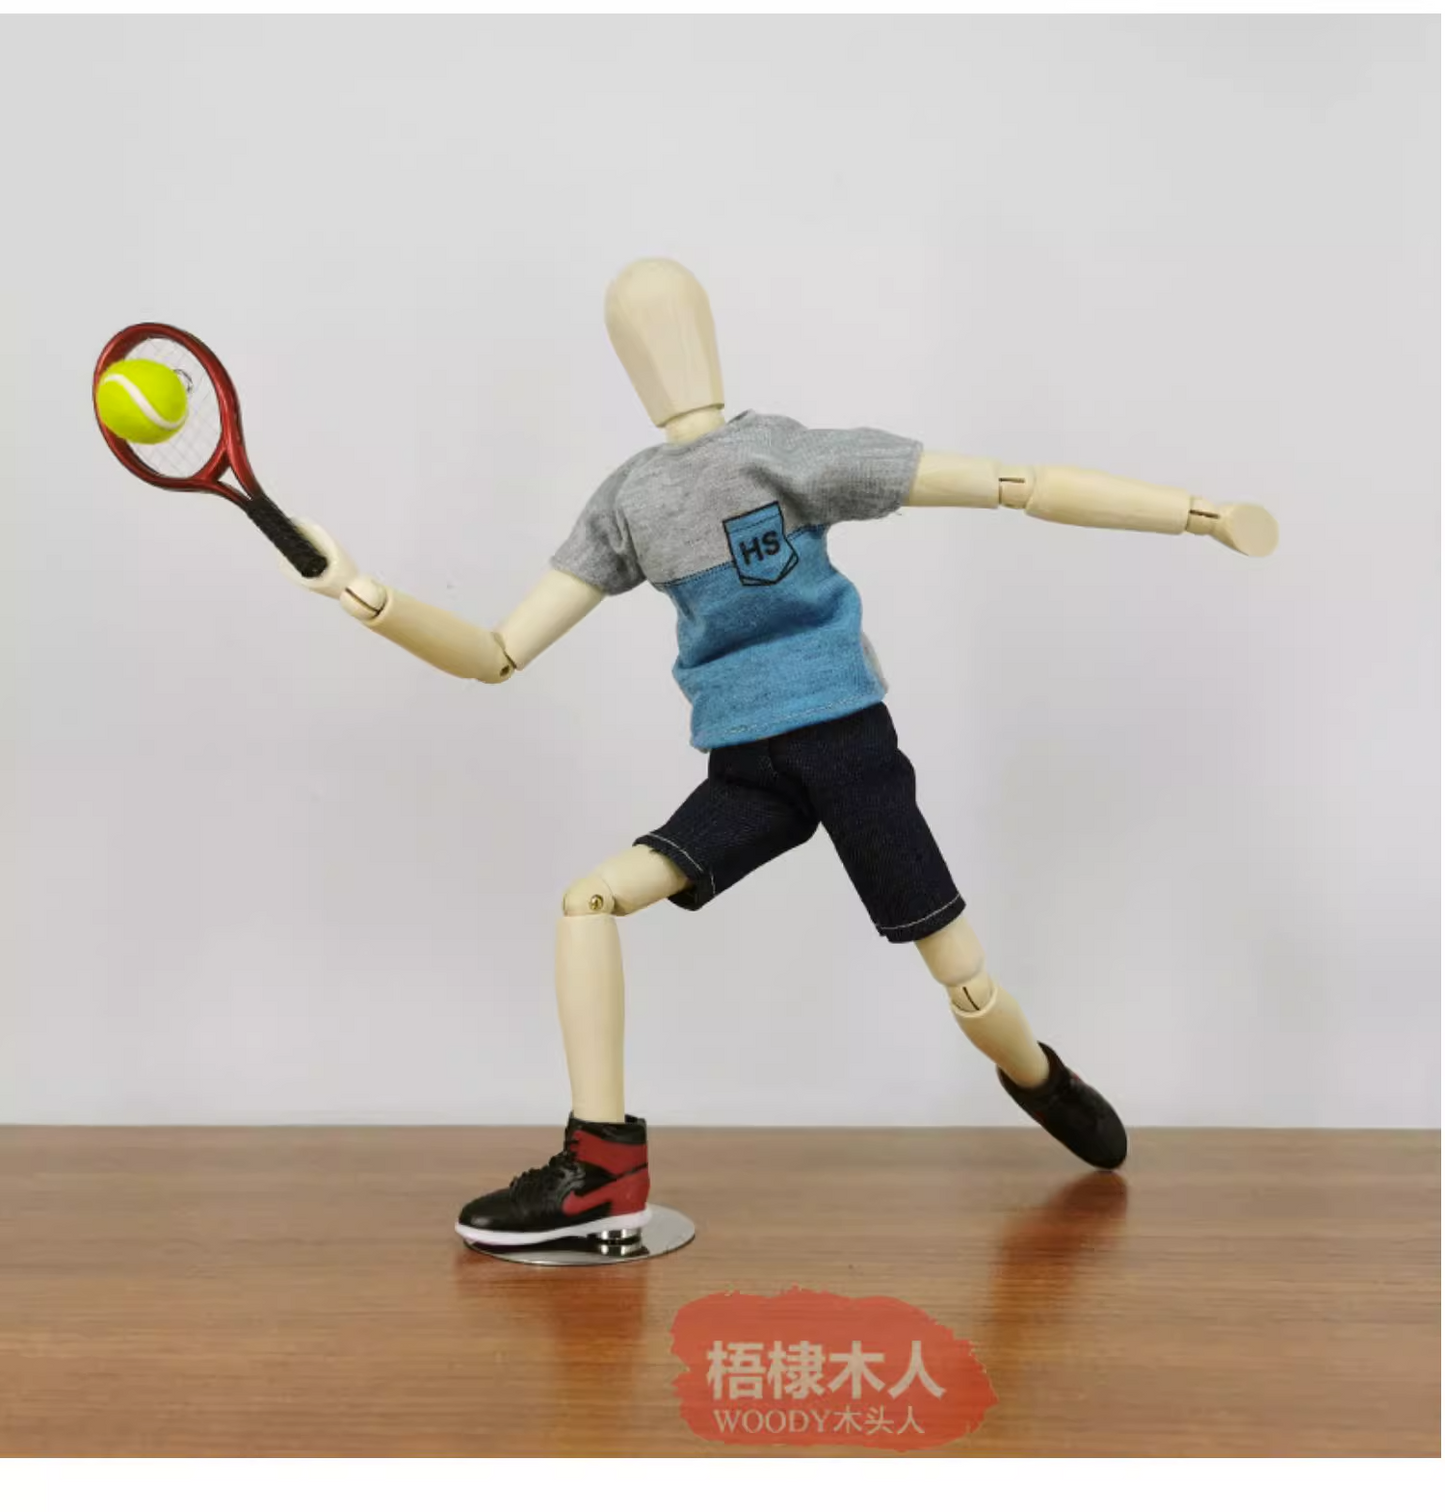 Wooden figure playing tennis（Height 30 CM）Blue Clothing